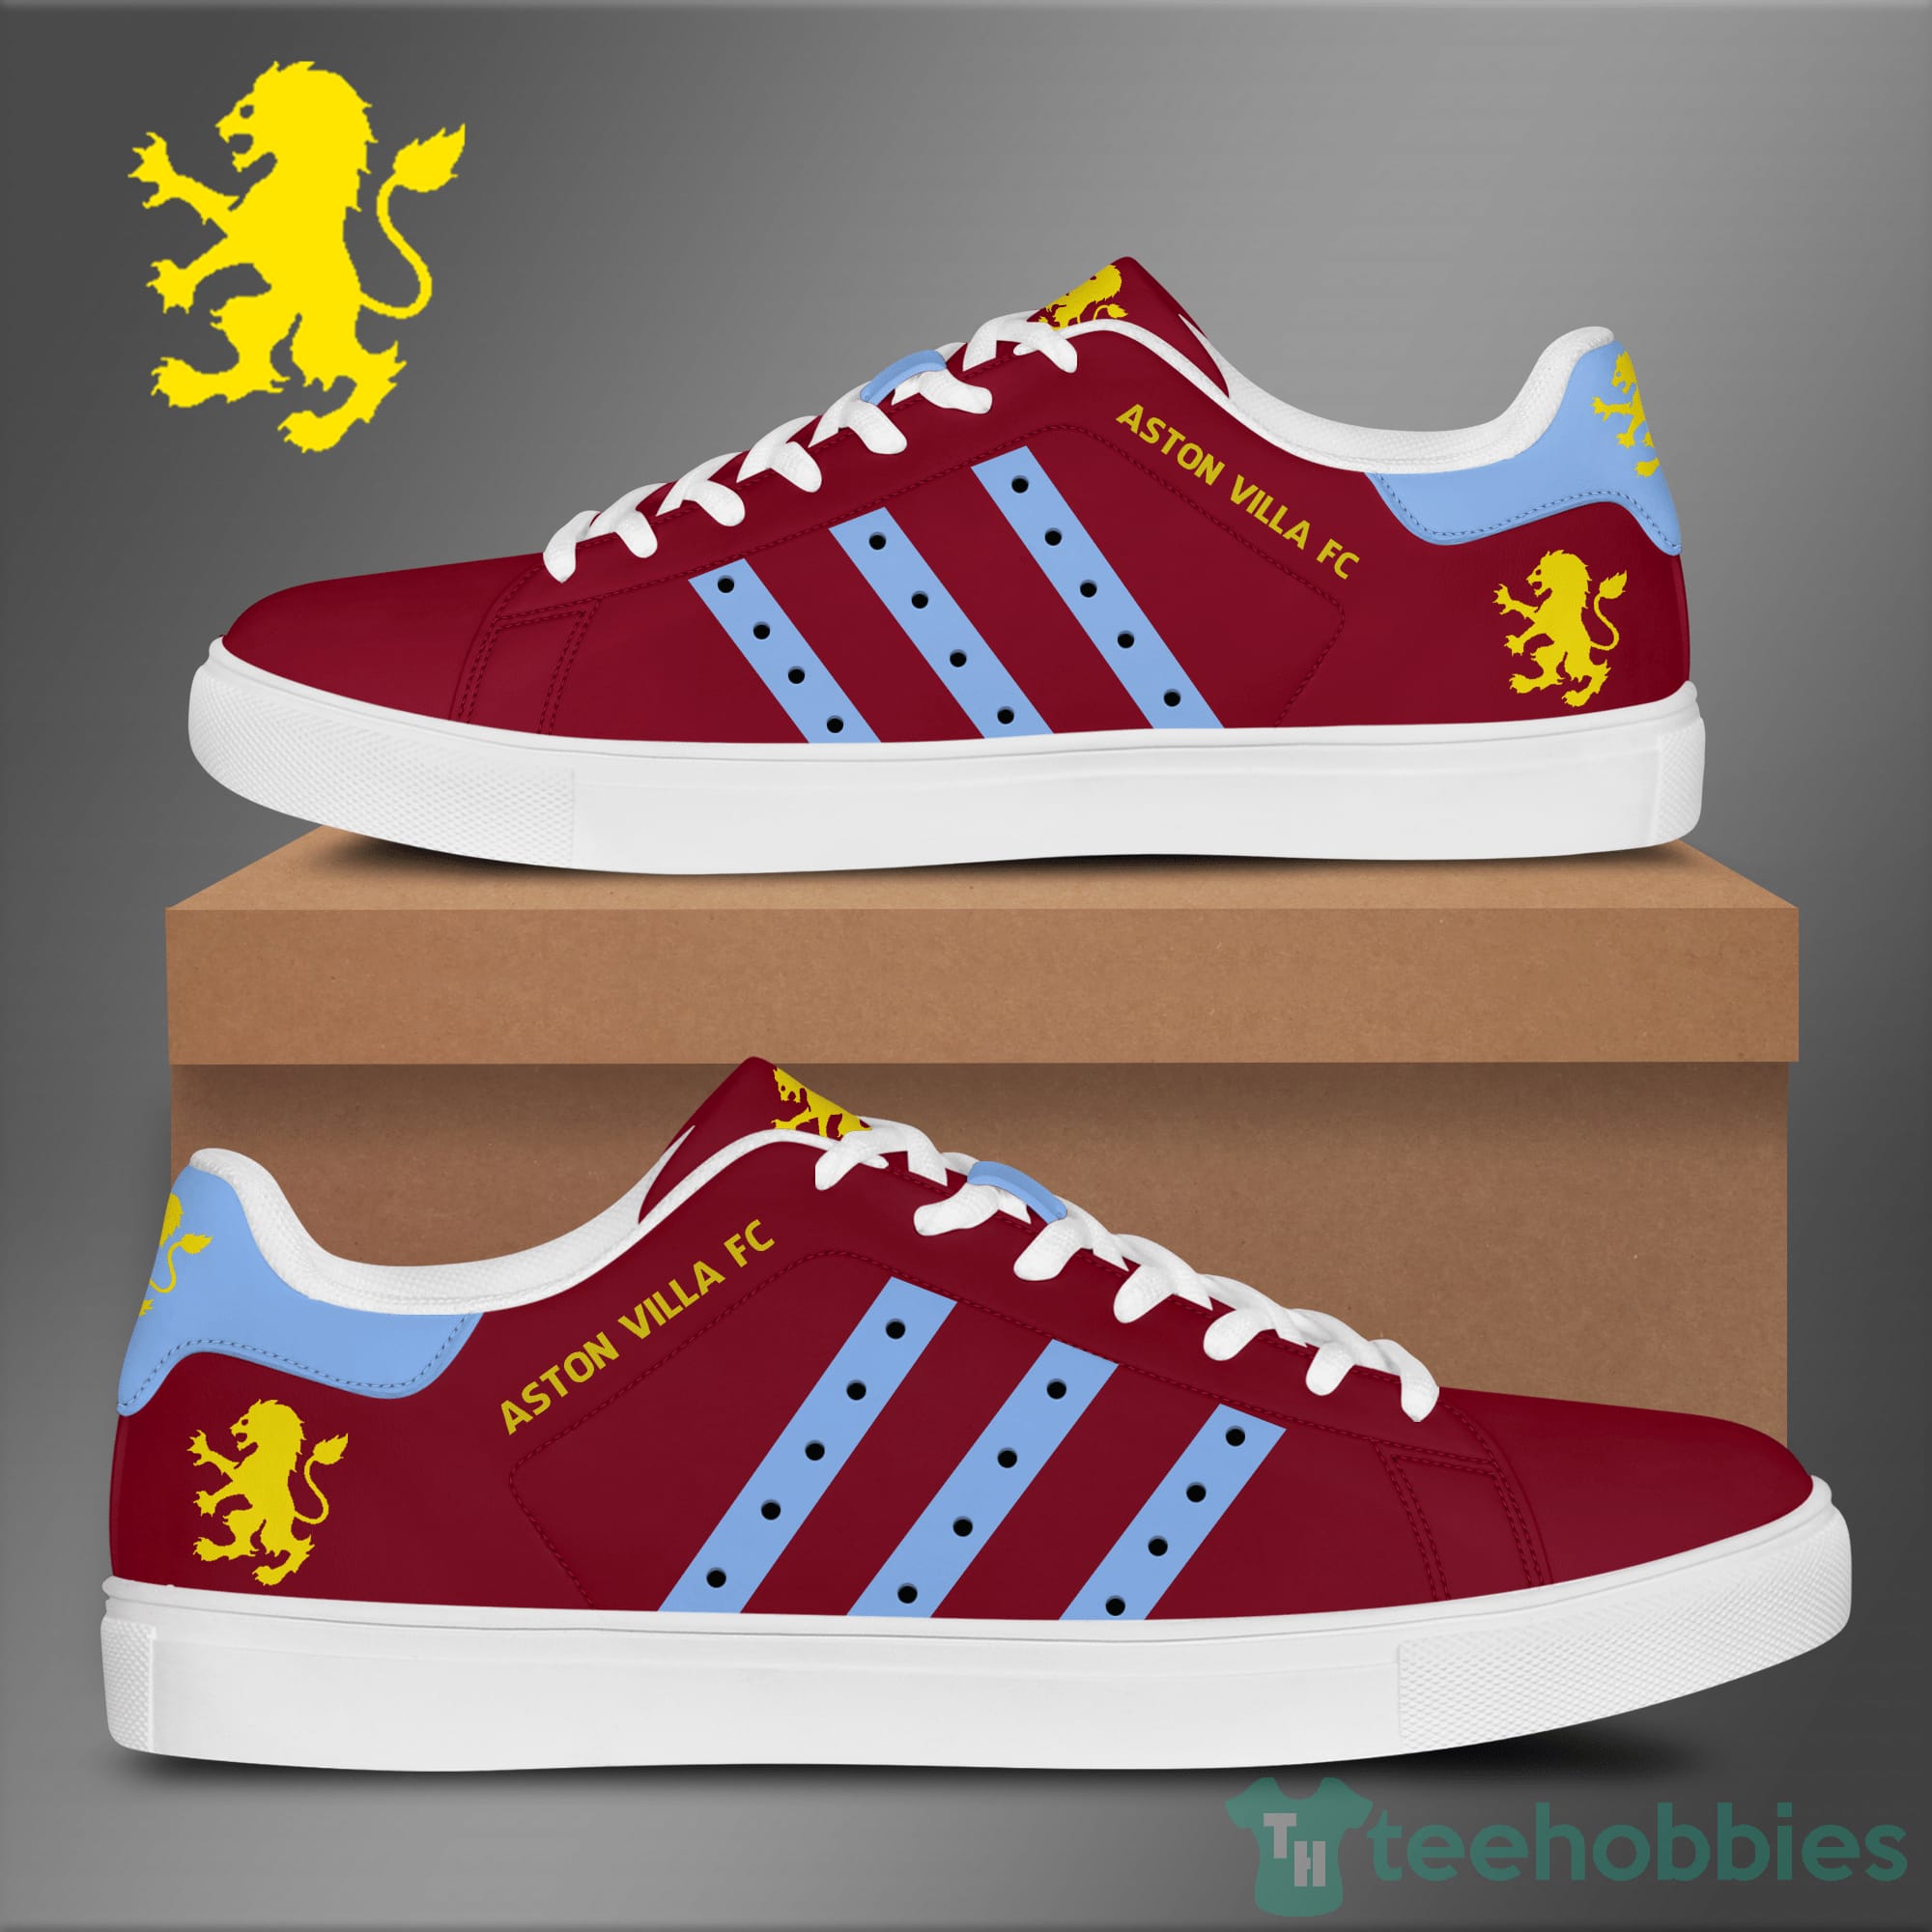 Aston Villa Fc Red Low Top Skate Shoes Product photo 1